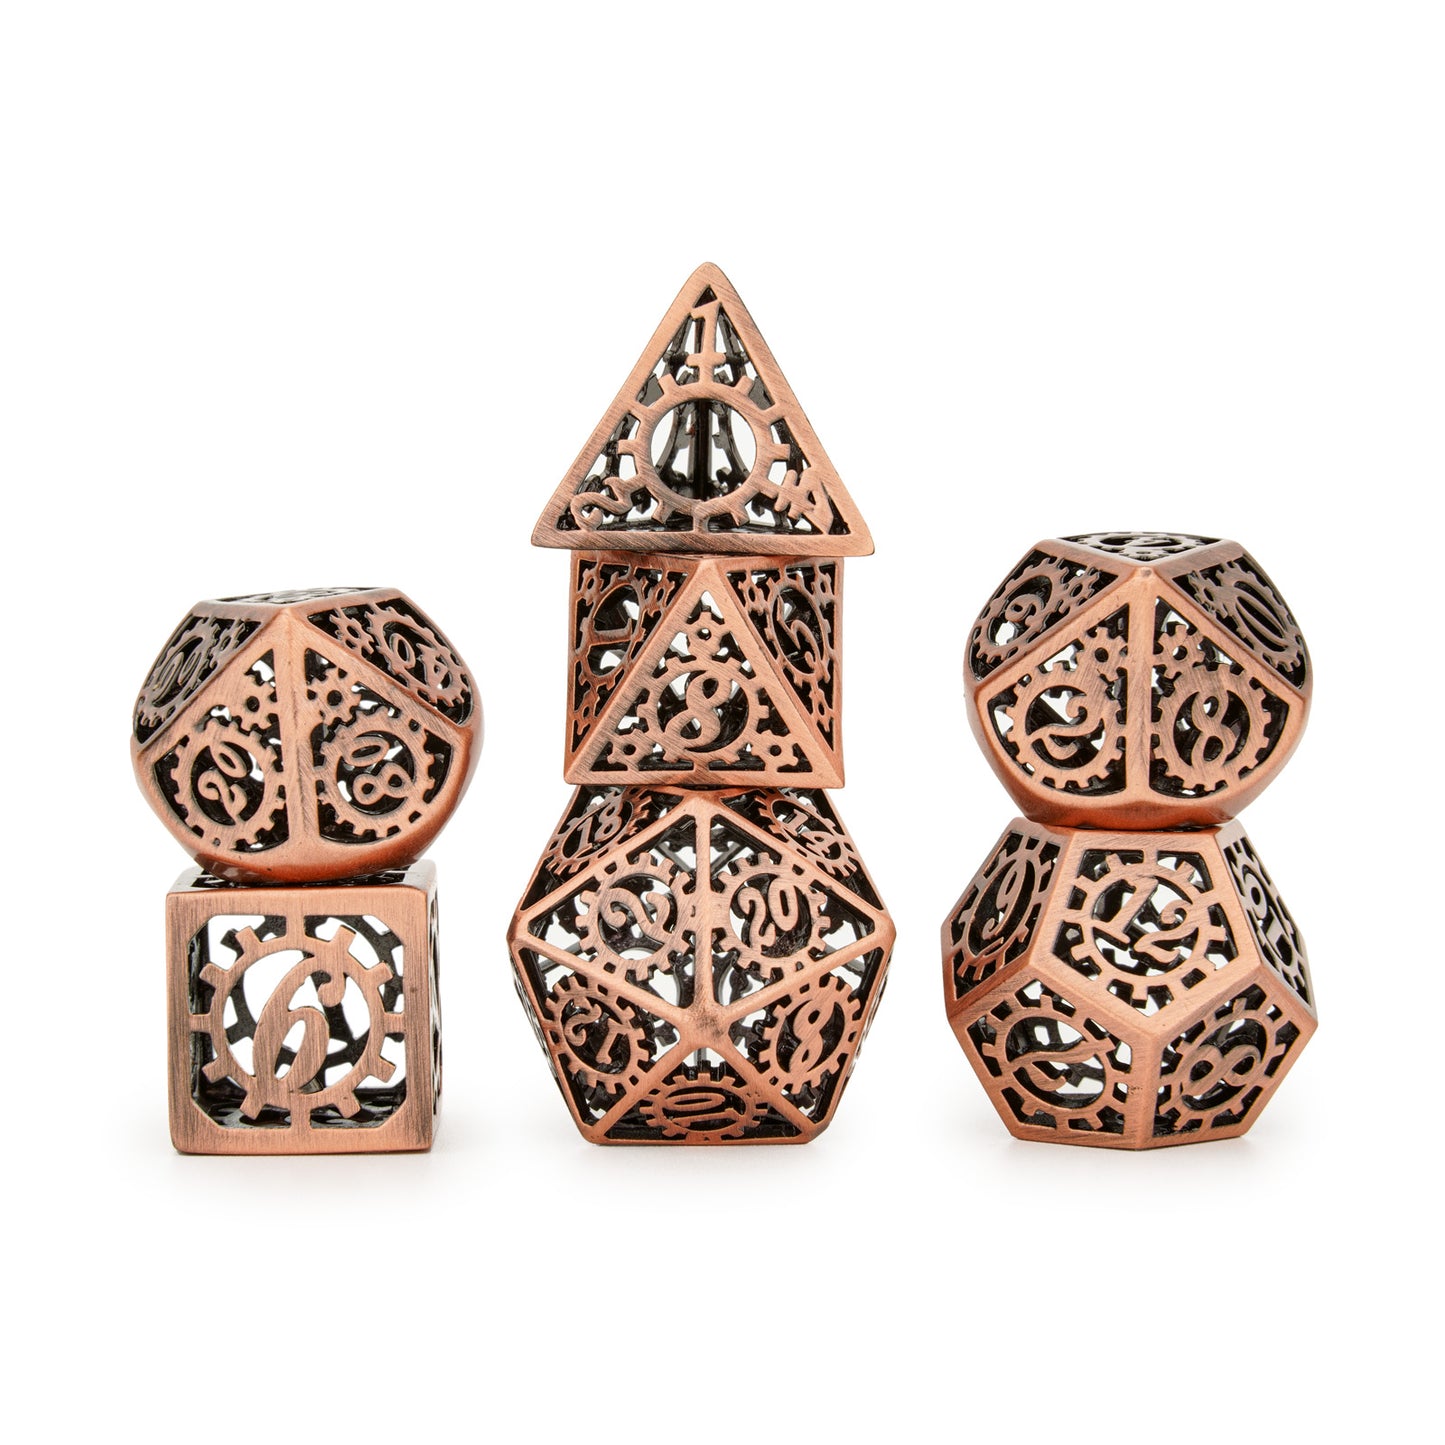 Handcrafted ancient copper hollow steampunk dice gear cage dice set - HYMGHO Dice 